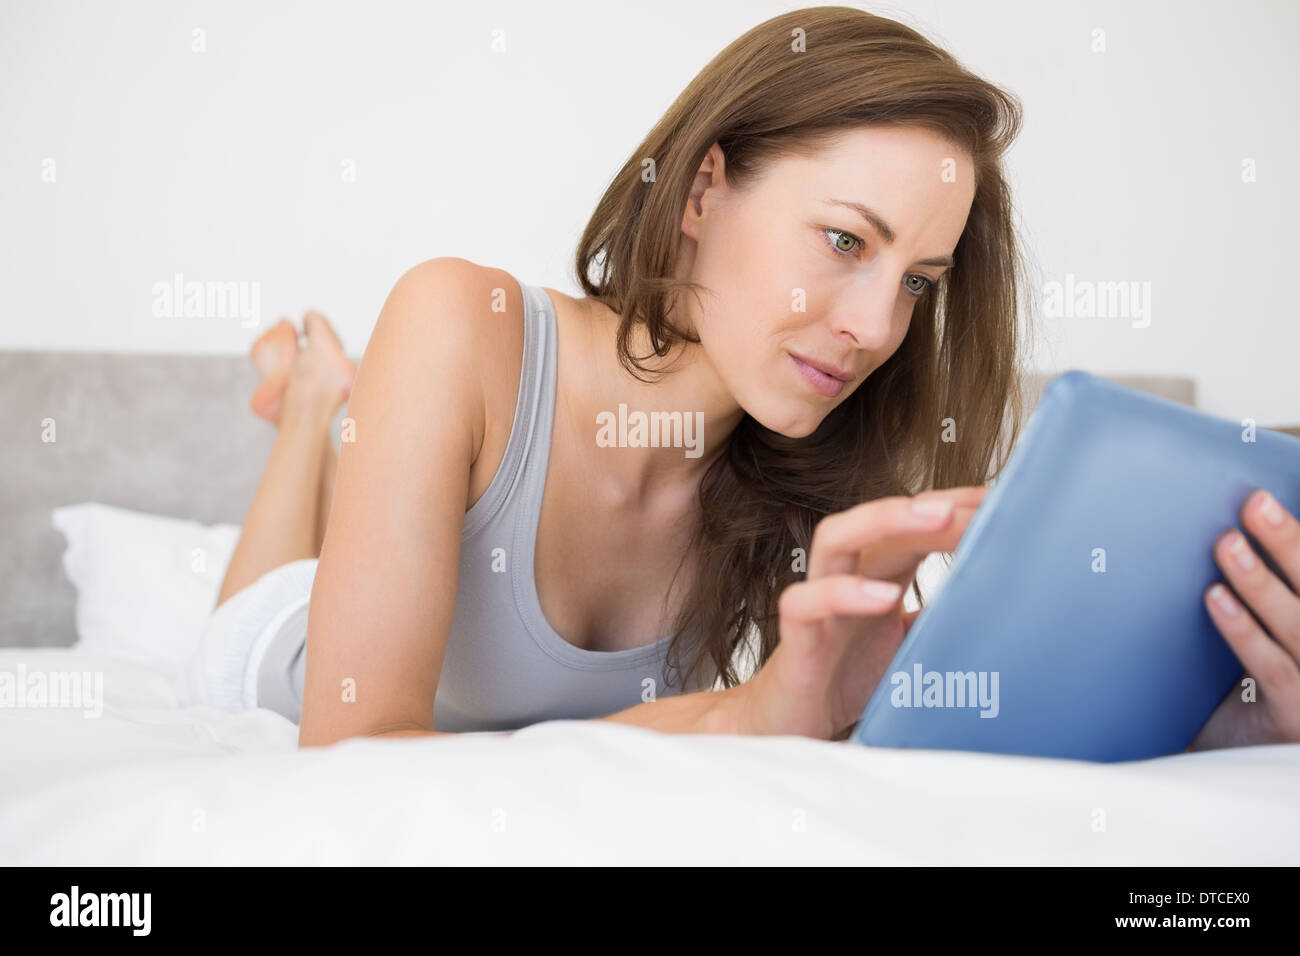 Pretty relaxed woman reading book in bed Stock Photo